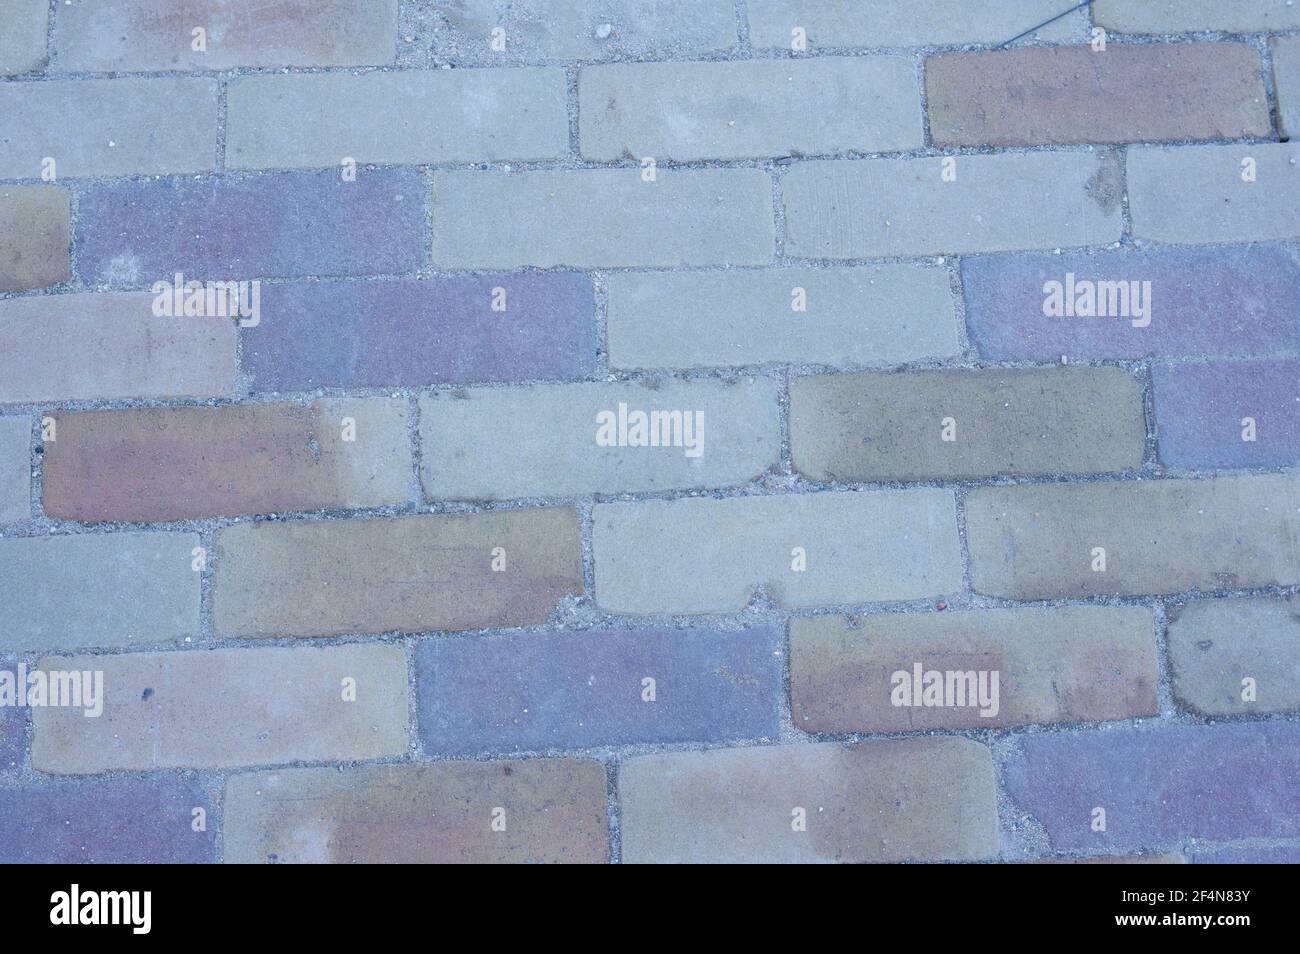 Street brick pattern with different colors background Stock Photo